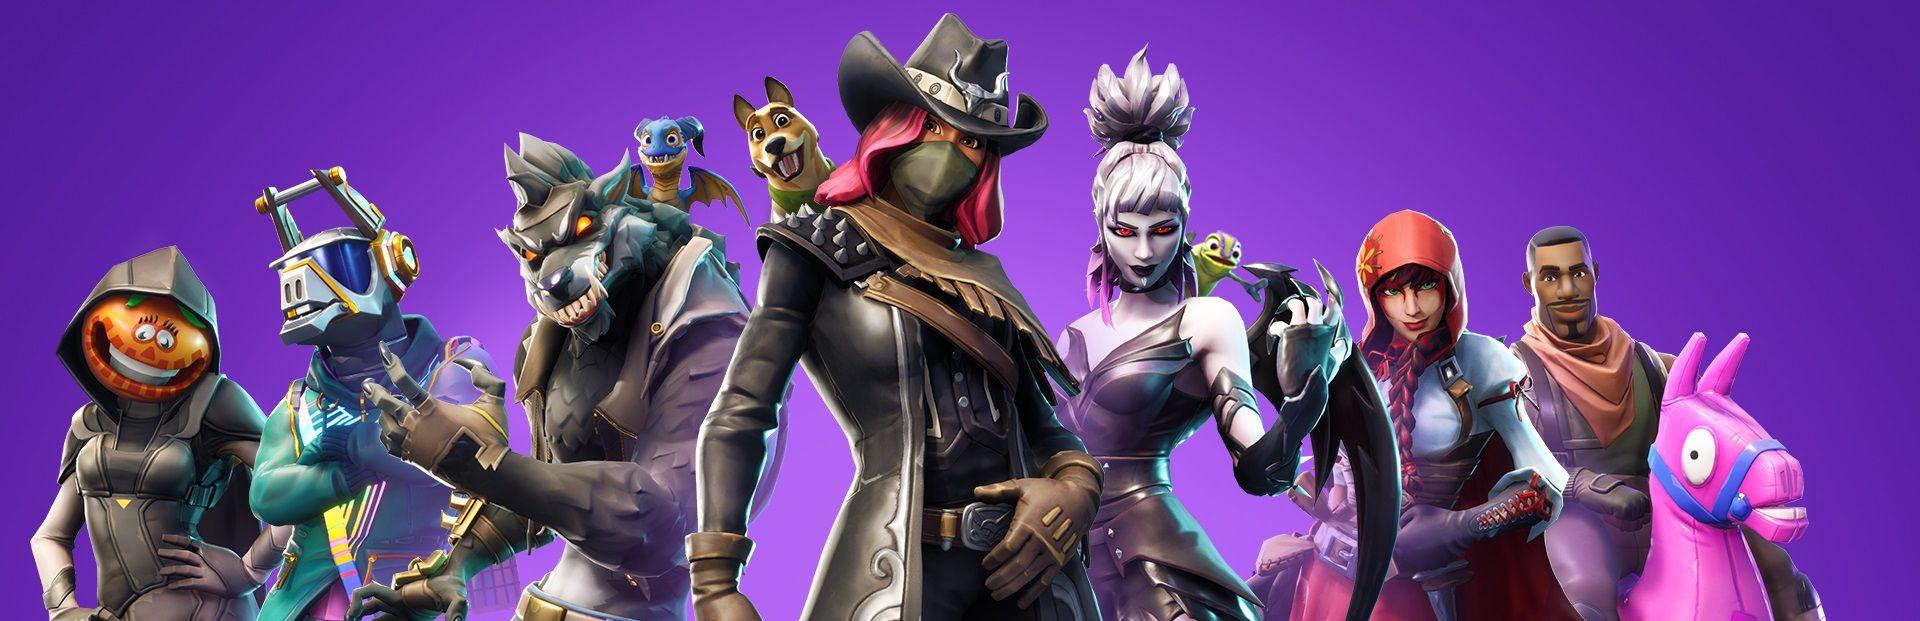 How to Upgrade the Dire and Calamity Skins in Fortnite.